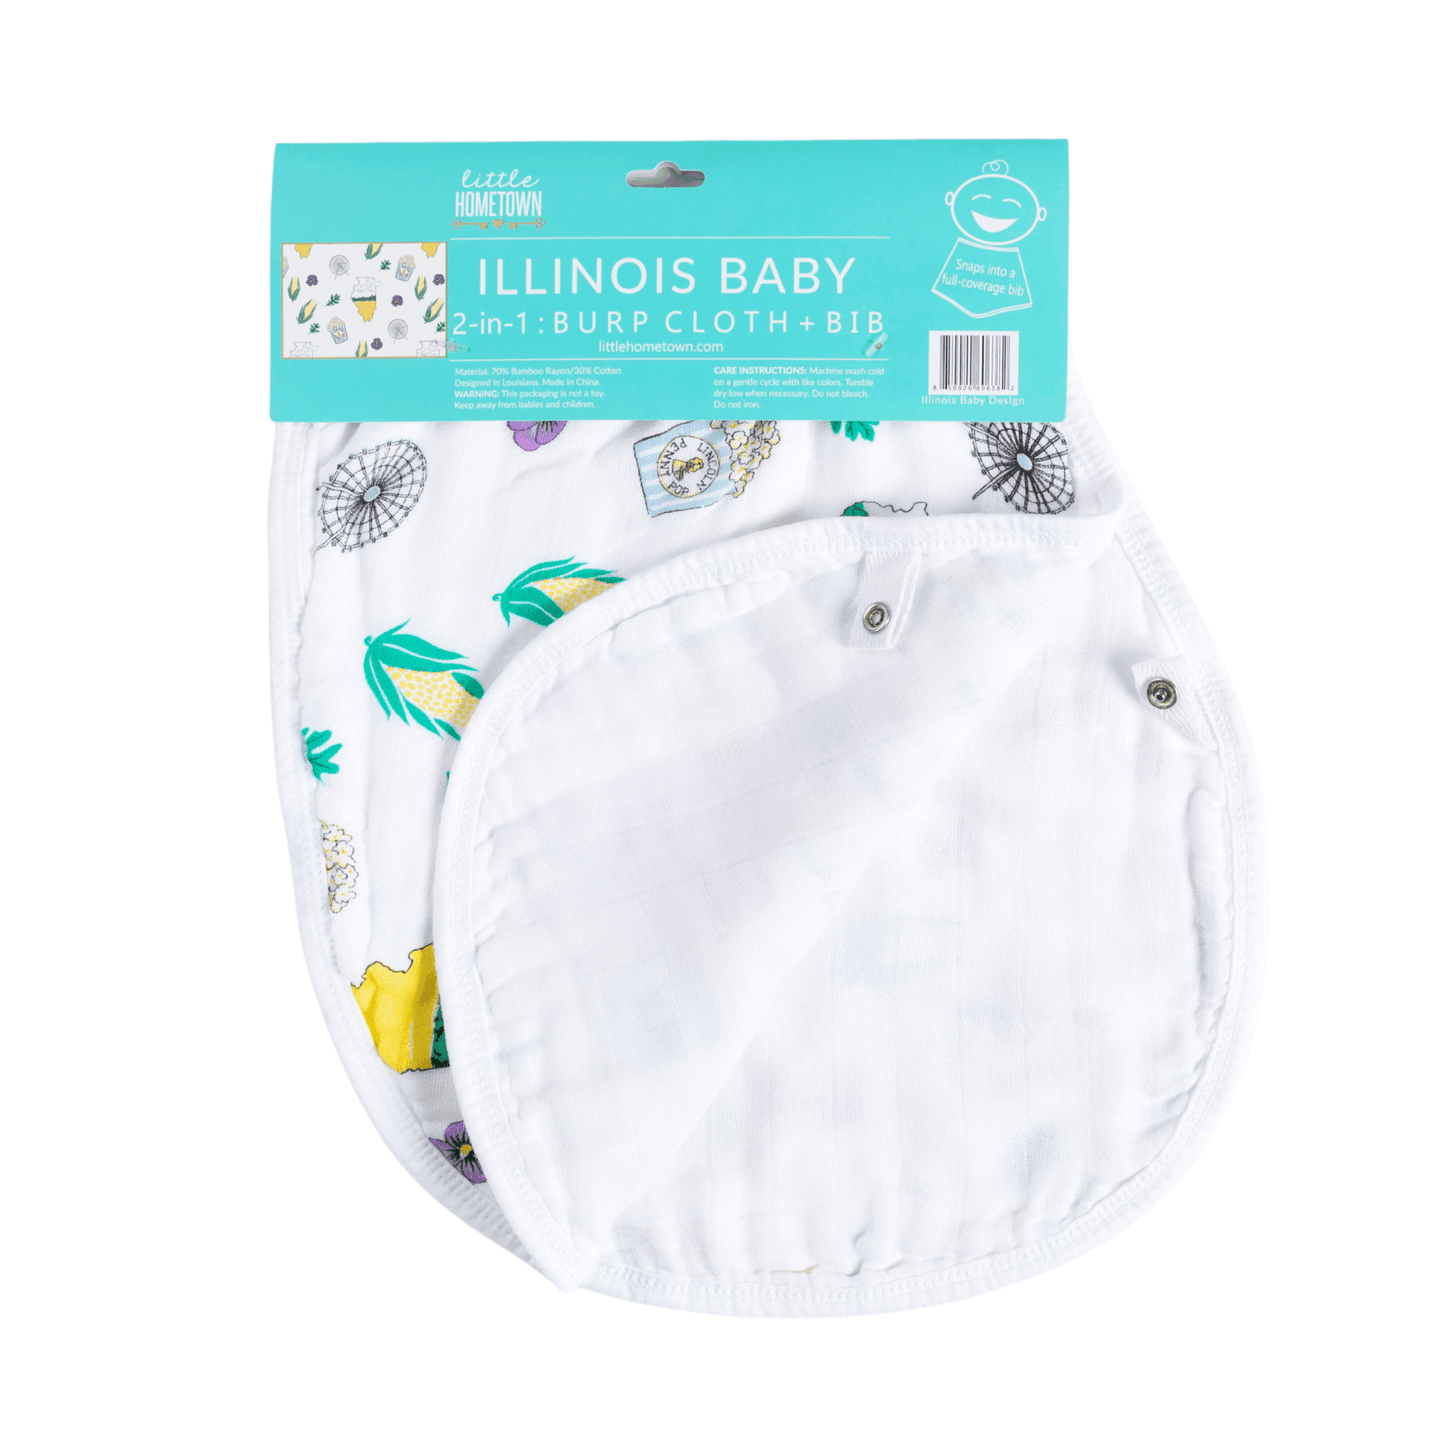 White baby bib and burp cloth set featuring a colorful Illinois state map with landmarks and "Illinois" text.